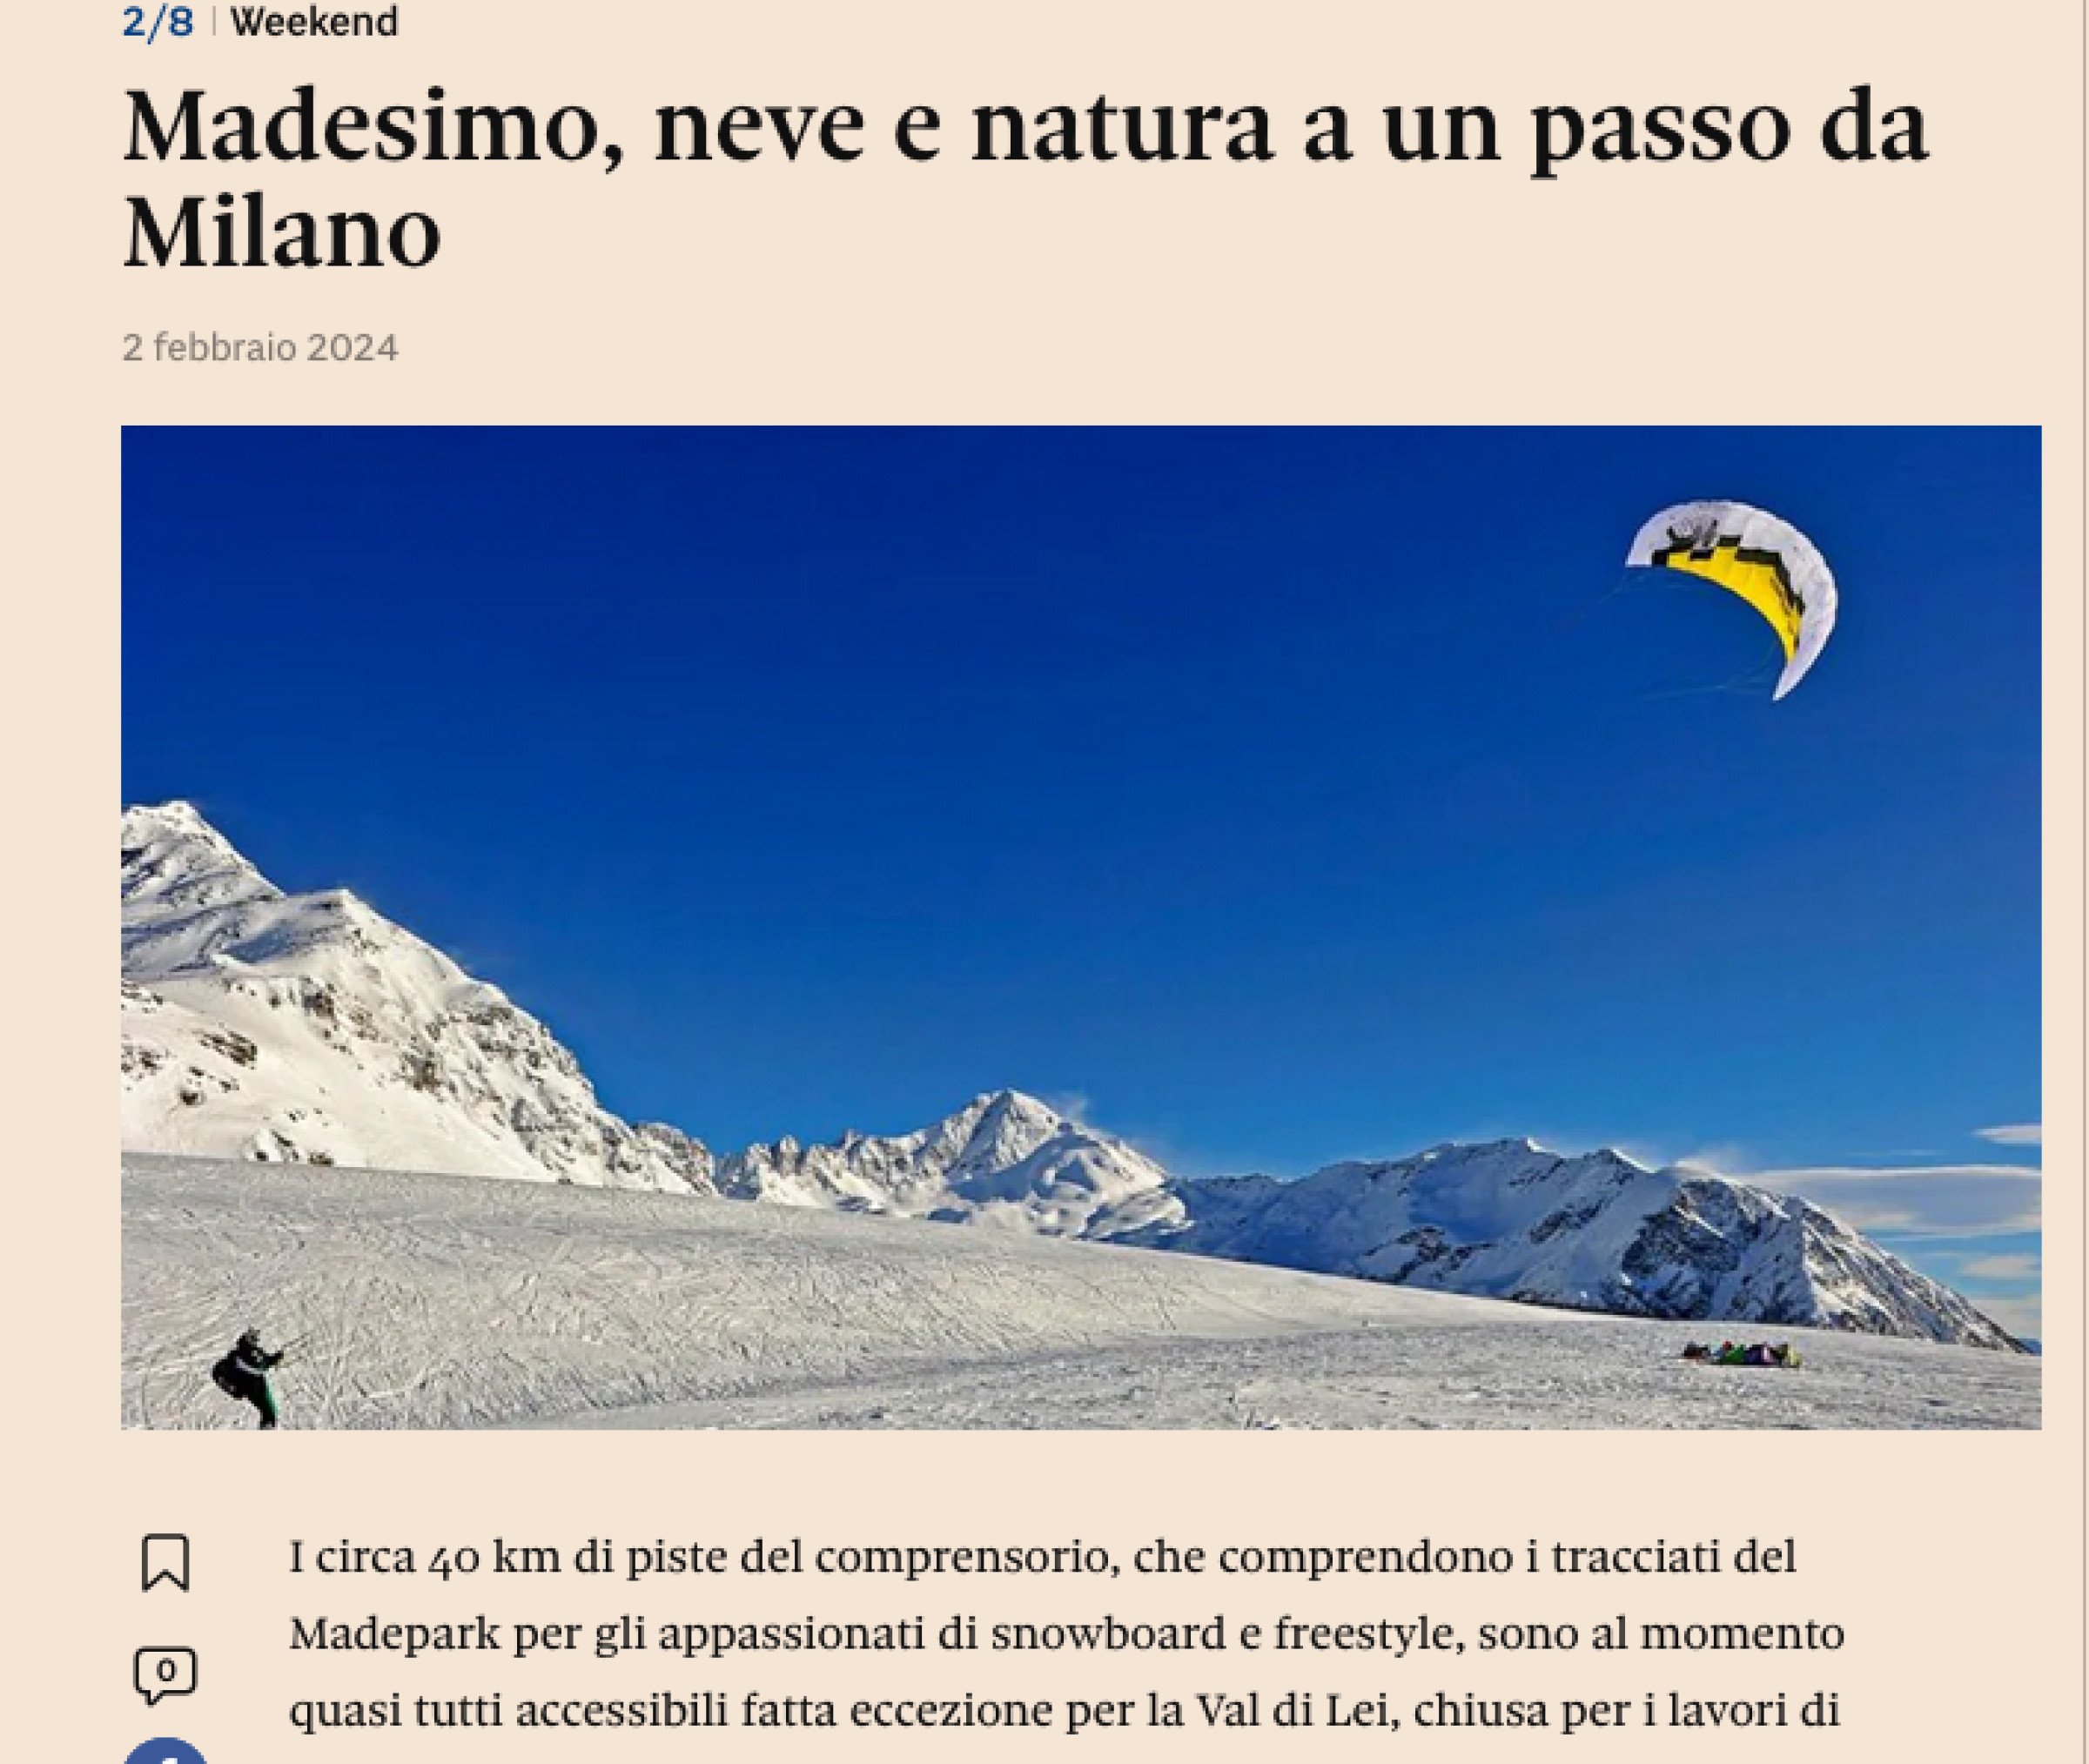 Madesimo, snow and nature just a stone's throw from Milan